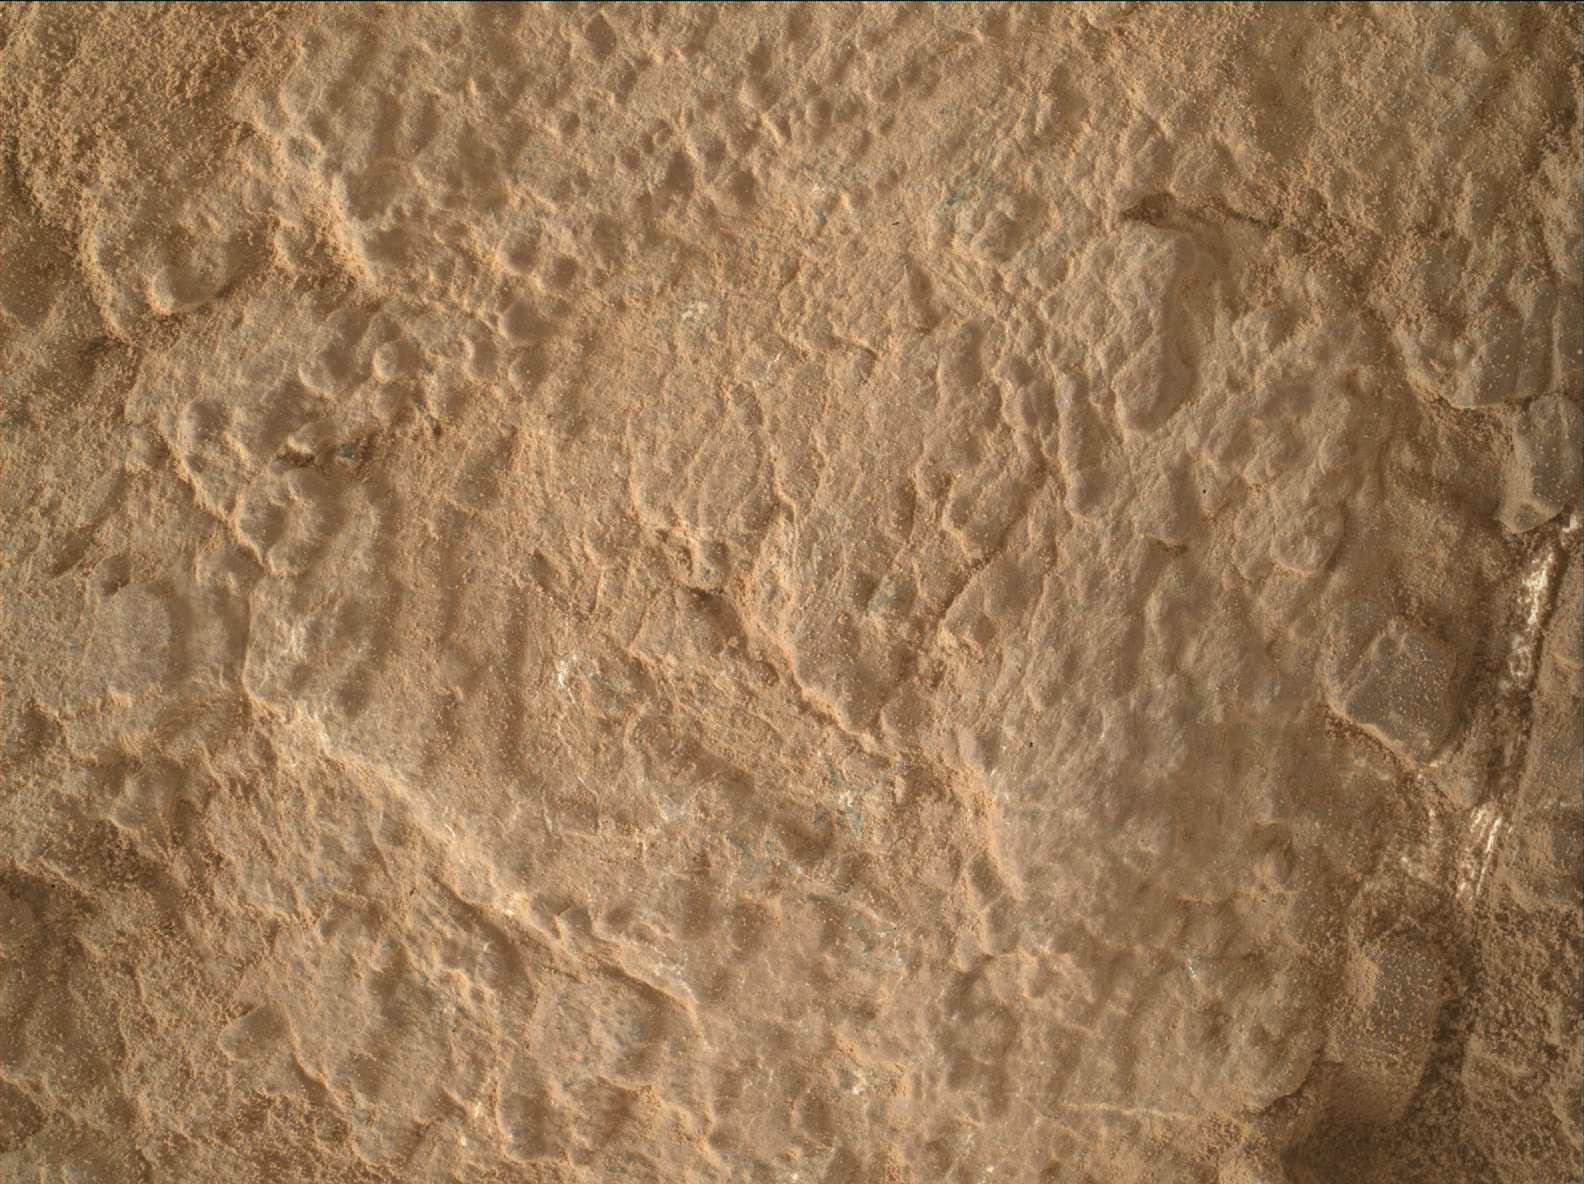 Nasa's Mars rover Curiosity acquired this image using its Mars Hand Lens Imager (MAHLI) on Sol 2568